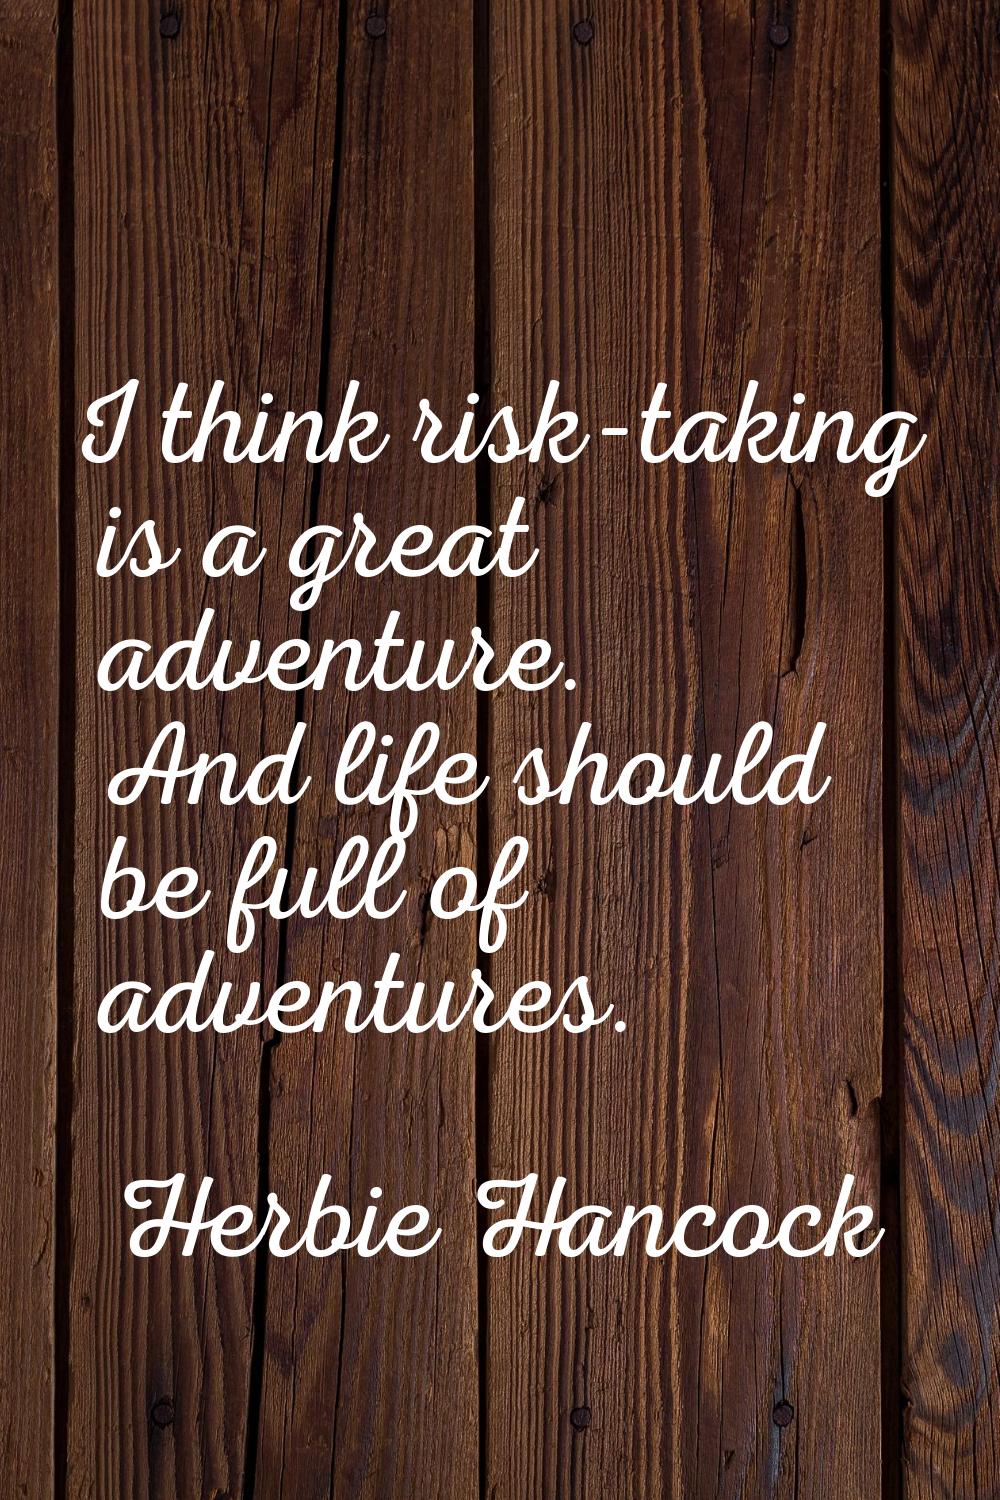 I think risk-taking is a great adventure. And life should be full of adventures.